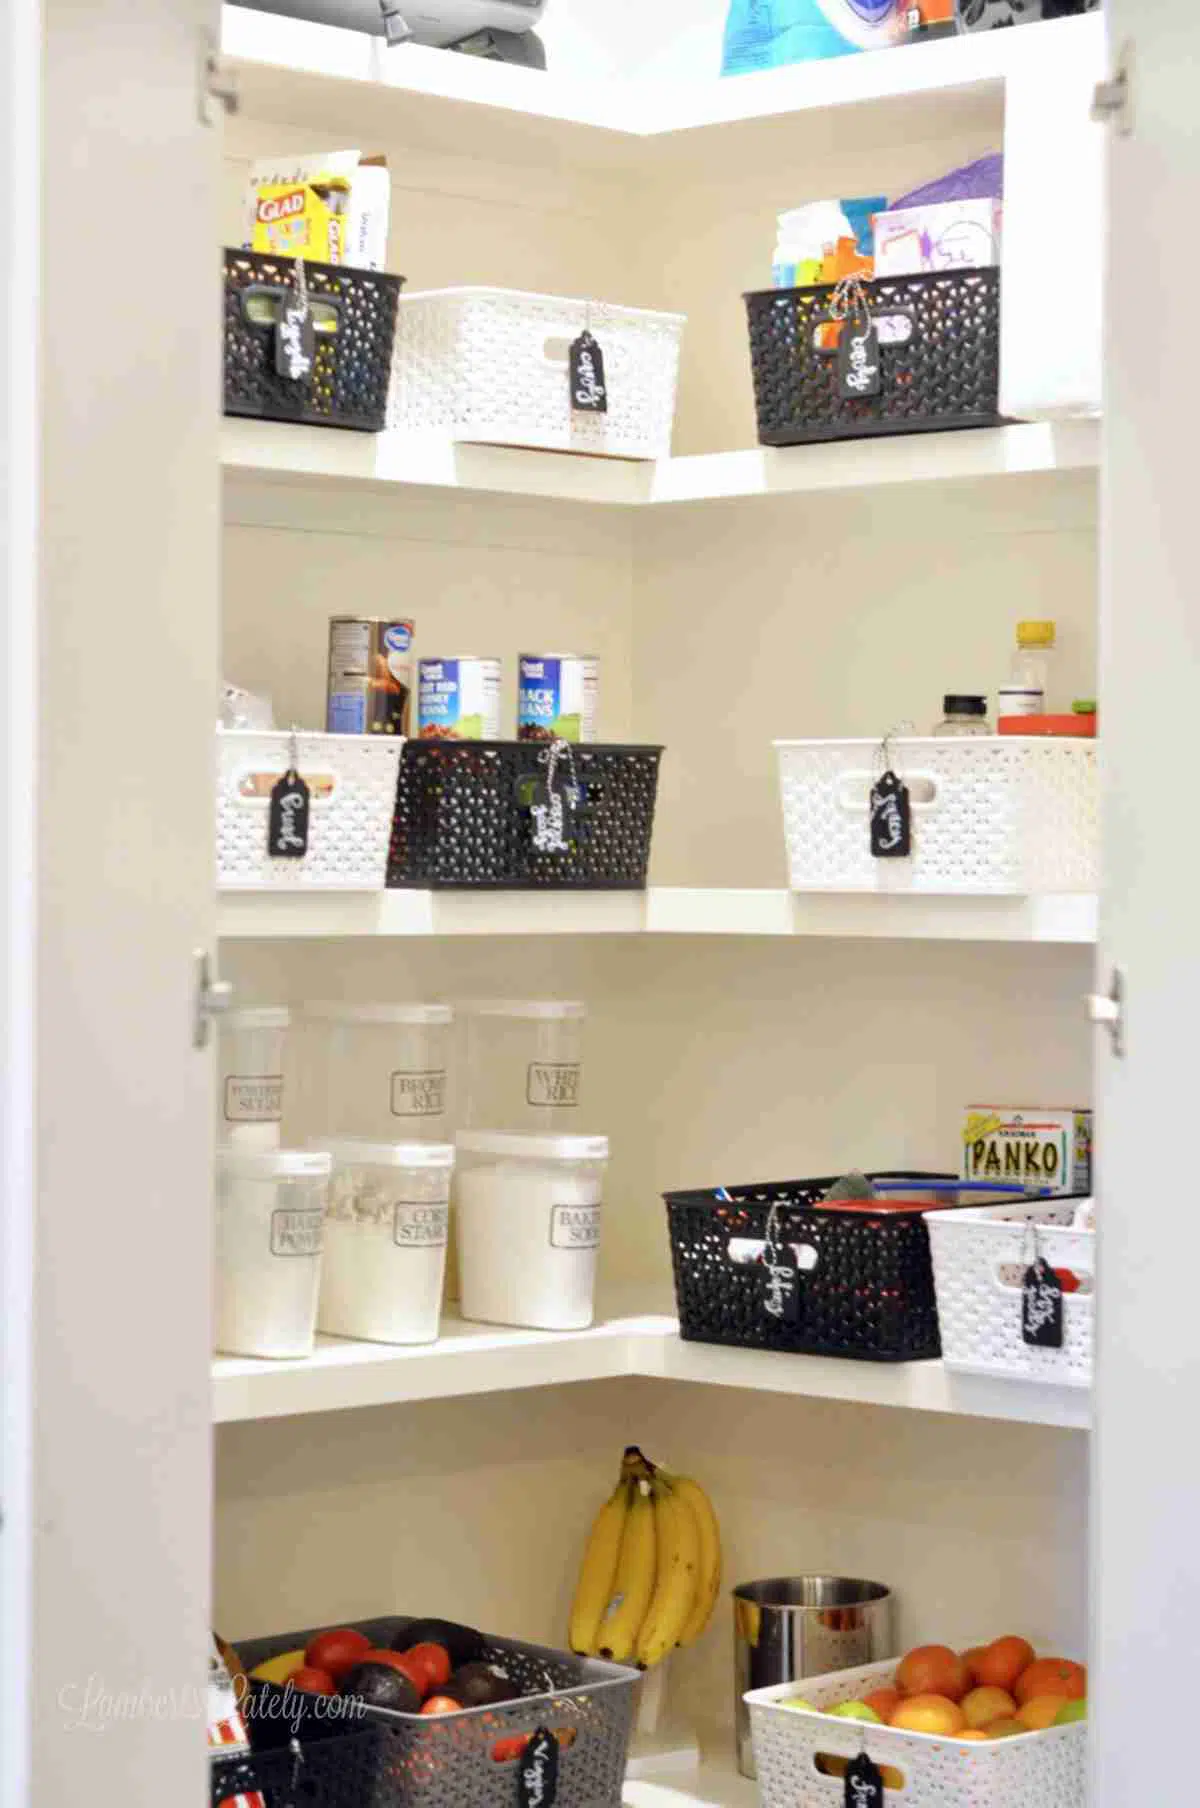 pantry with black, white, gray plastic bins on shelves.